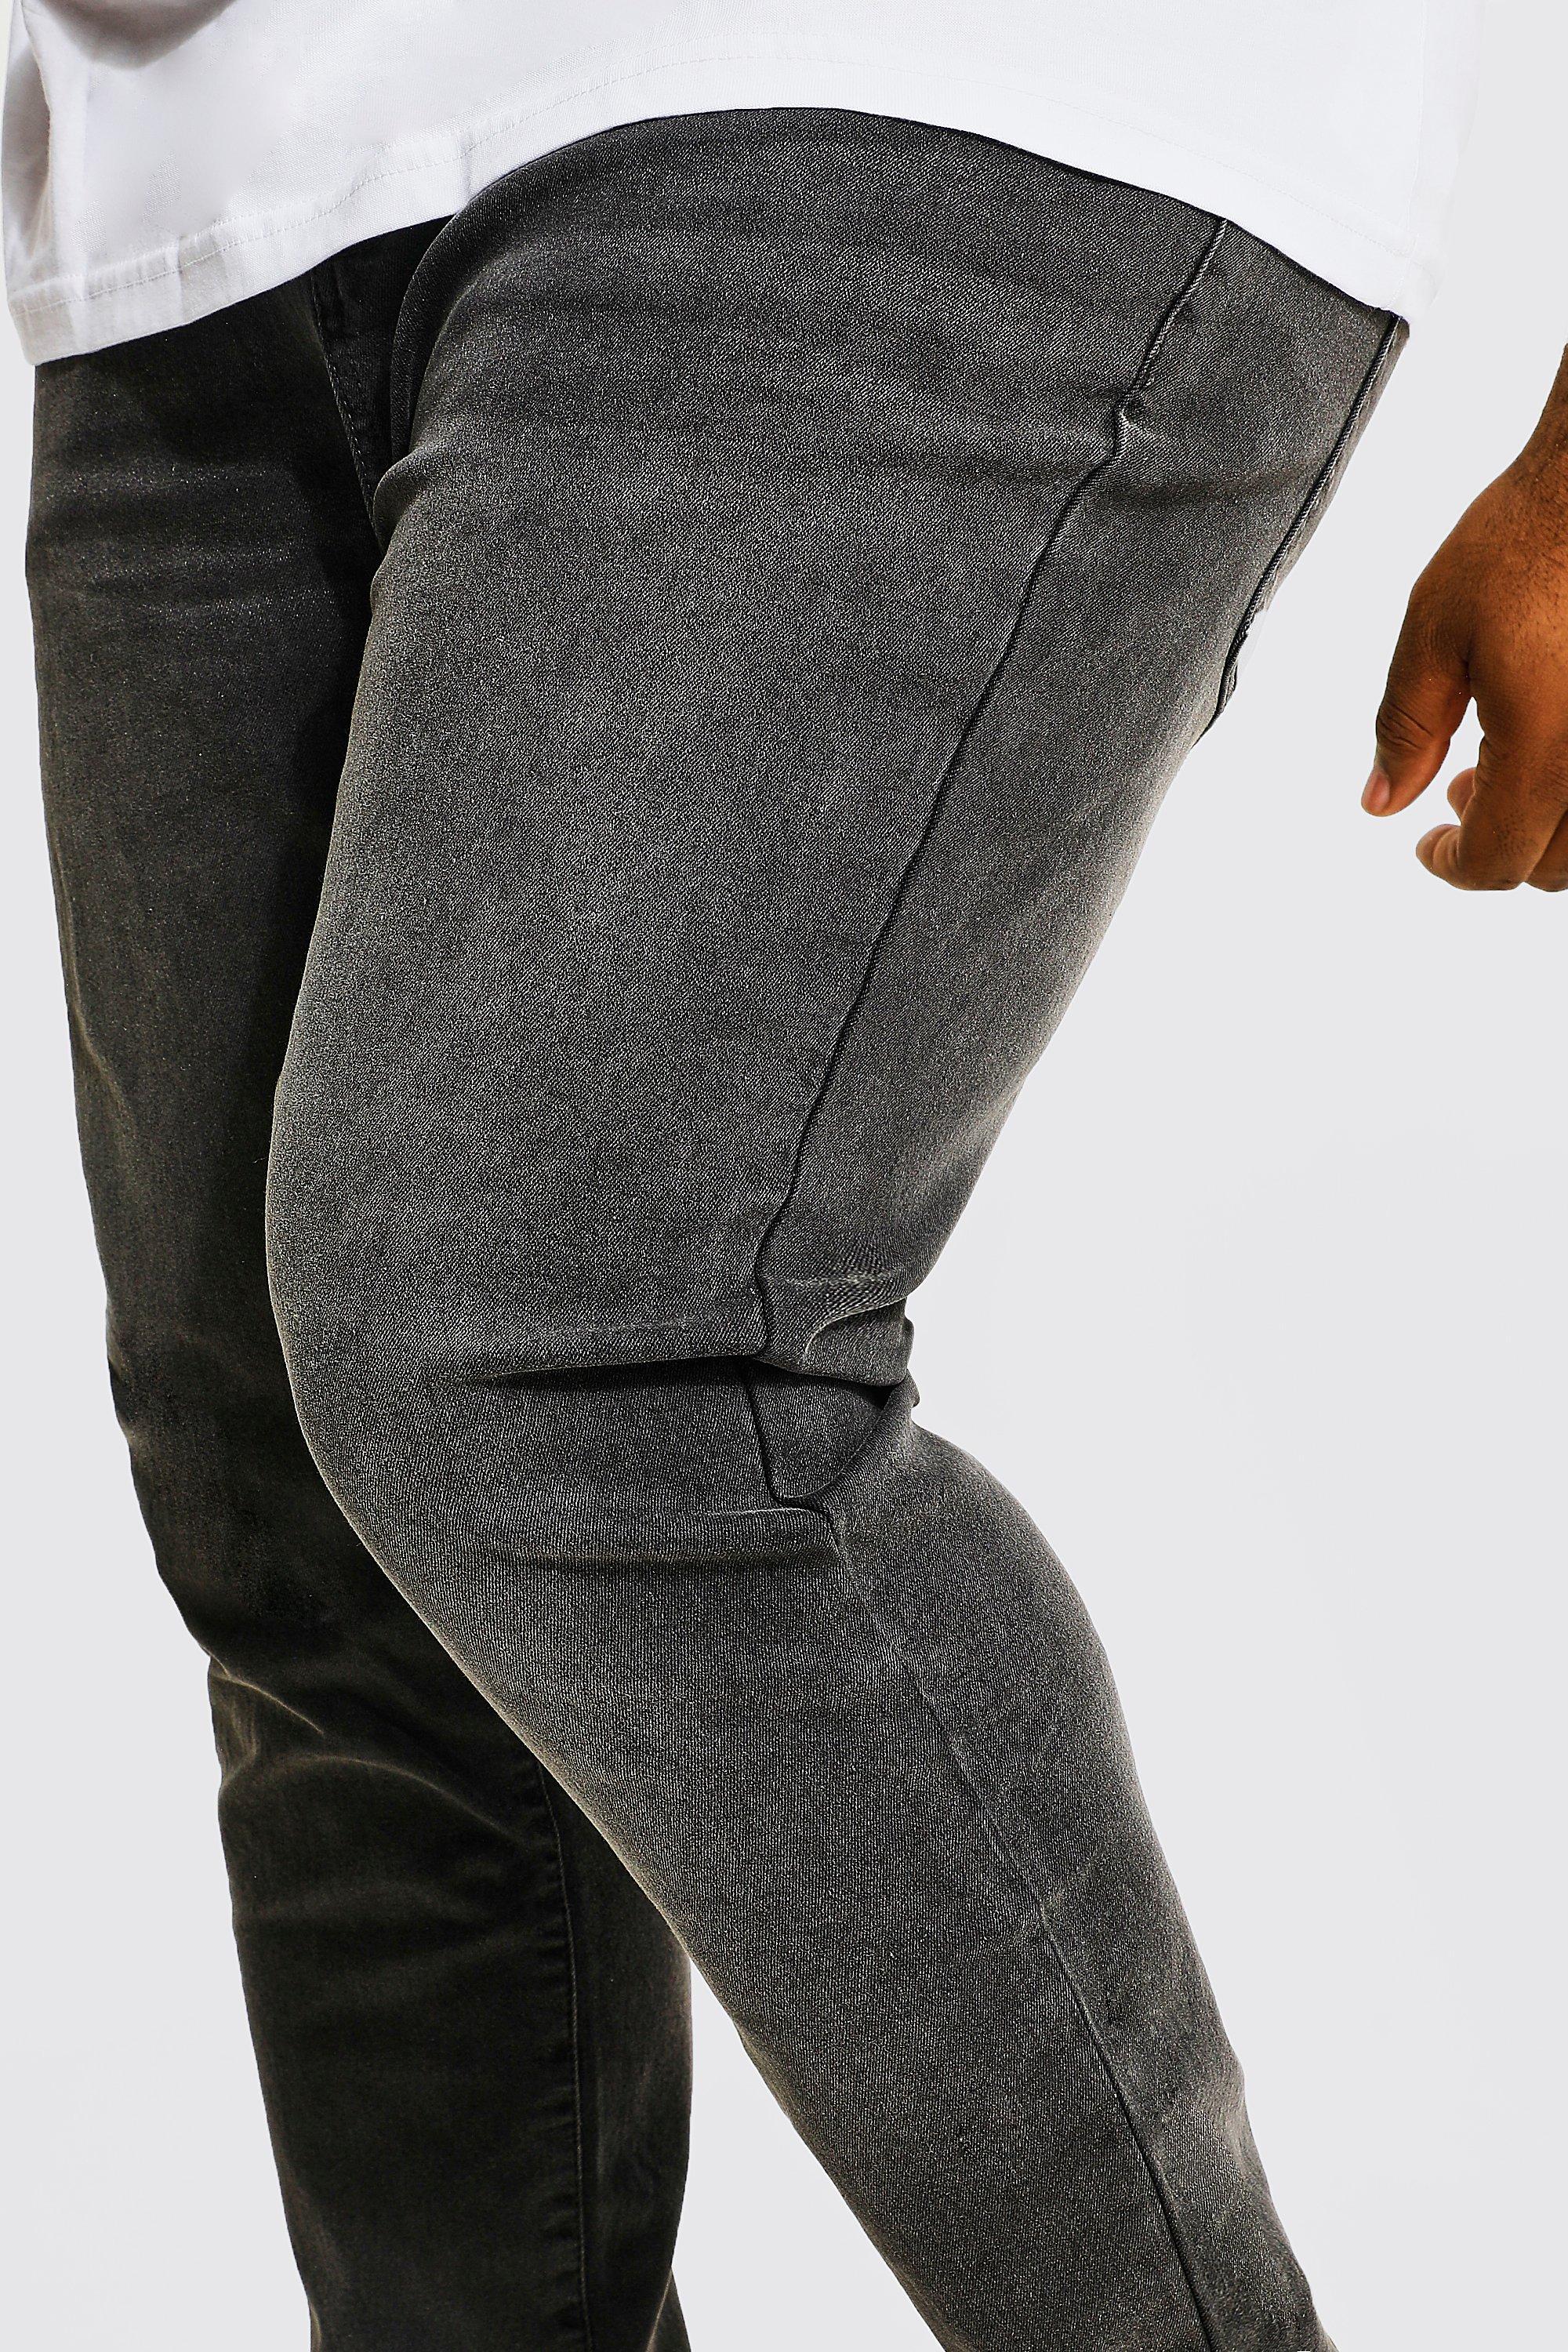 BoohooMAN Denim Plus Super Skinny Jean With Poly in Charcoal Grey Mens Clothing Jeans Skinny jeans for Men 